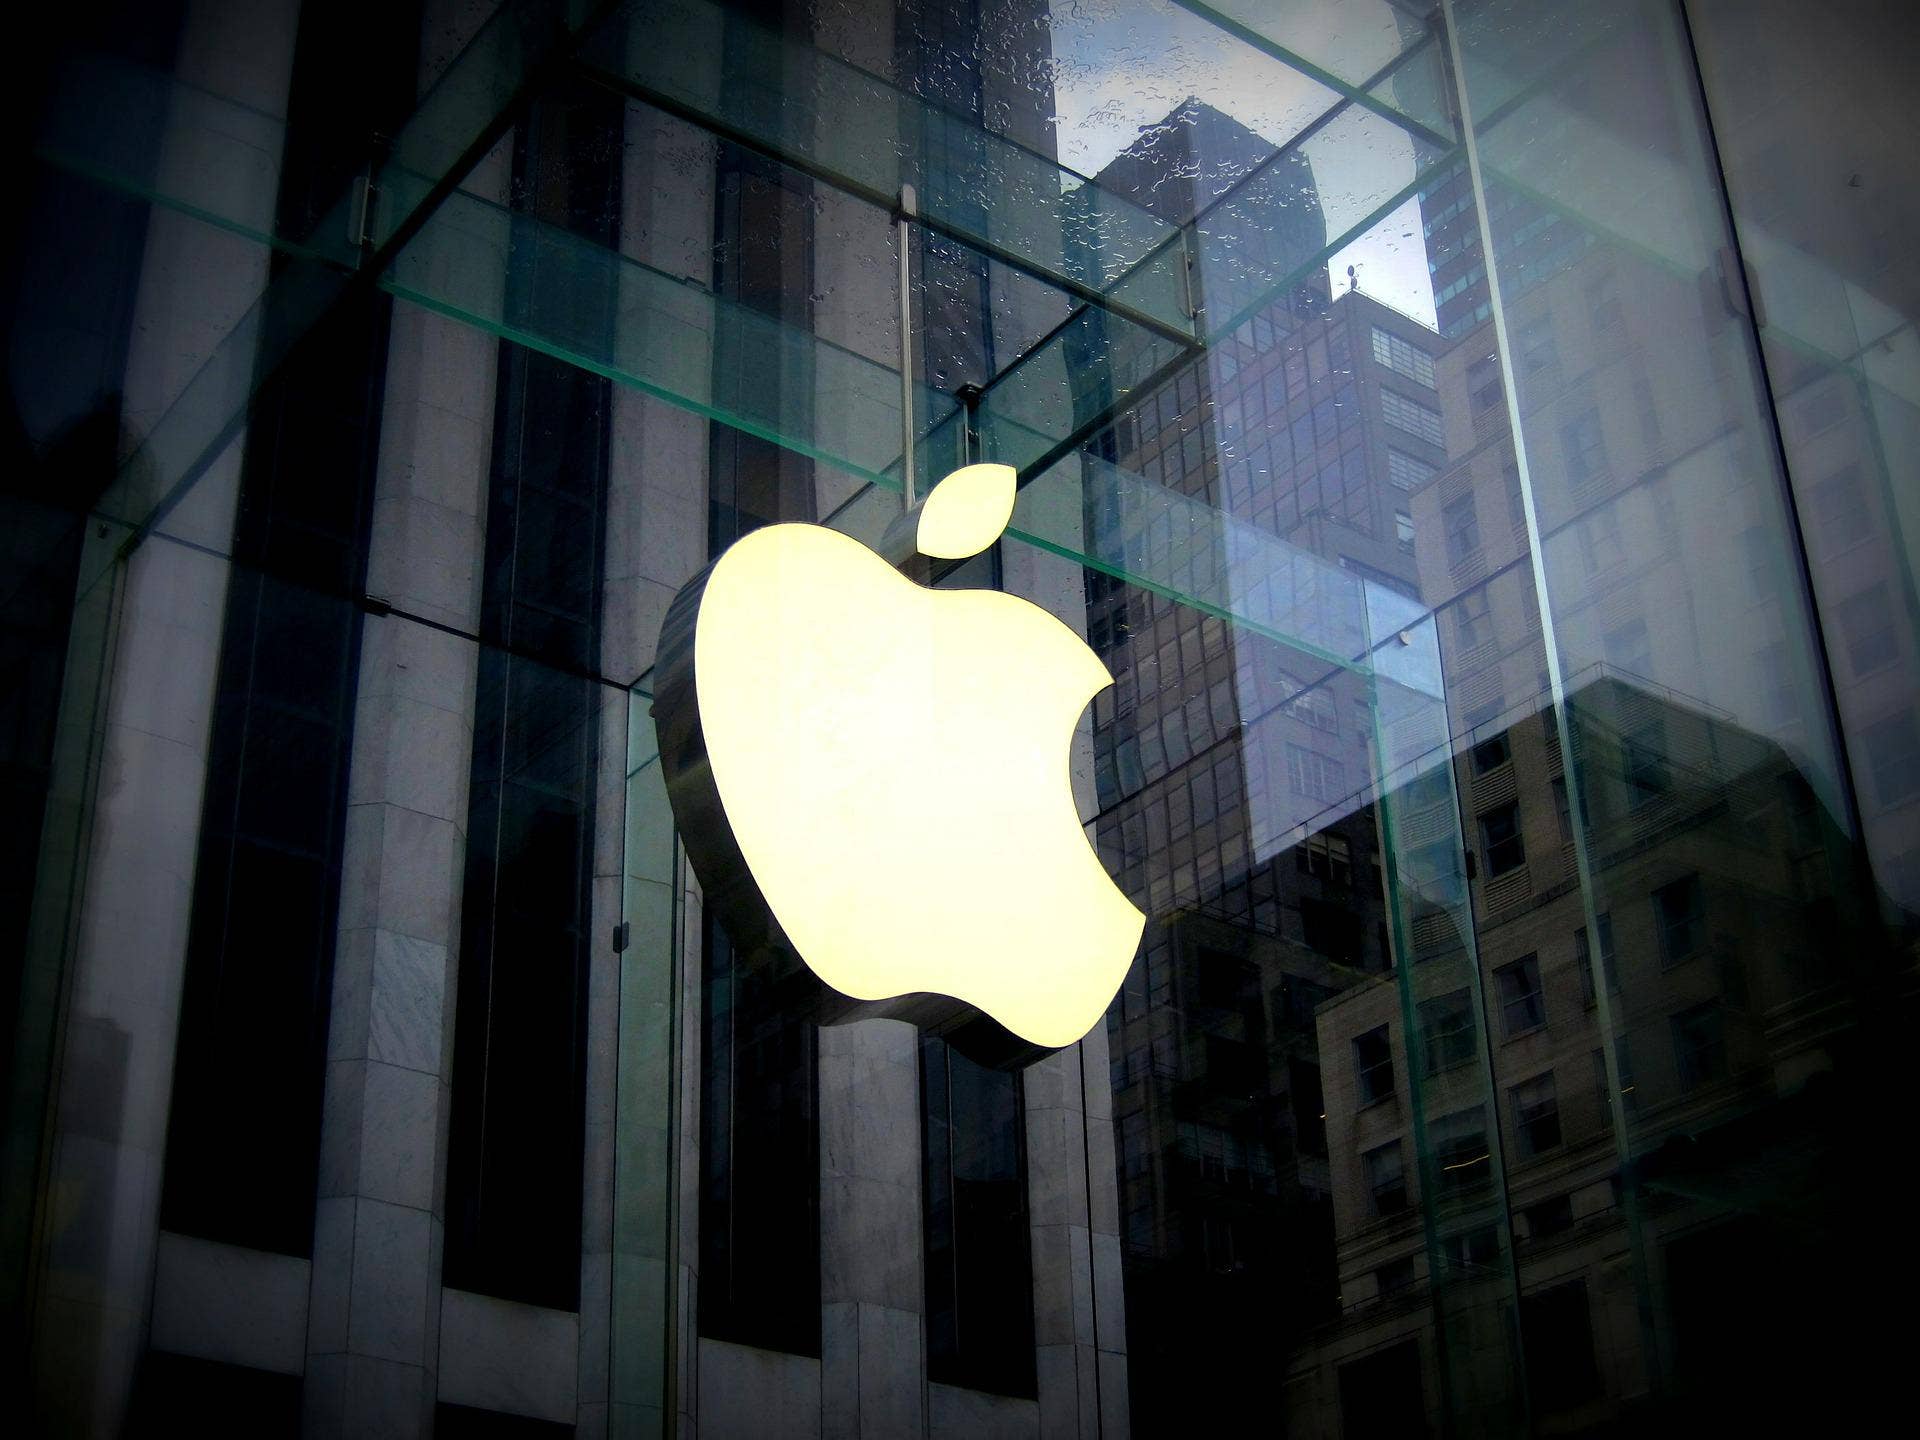 Is Apple Headed To $167? Here's What The Stock's Chart Indicates